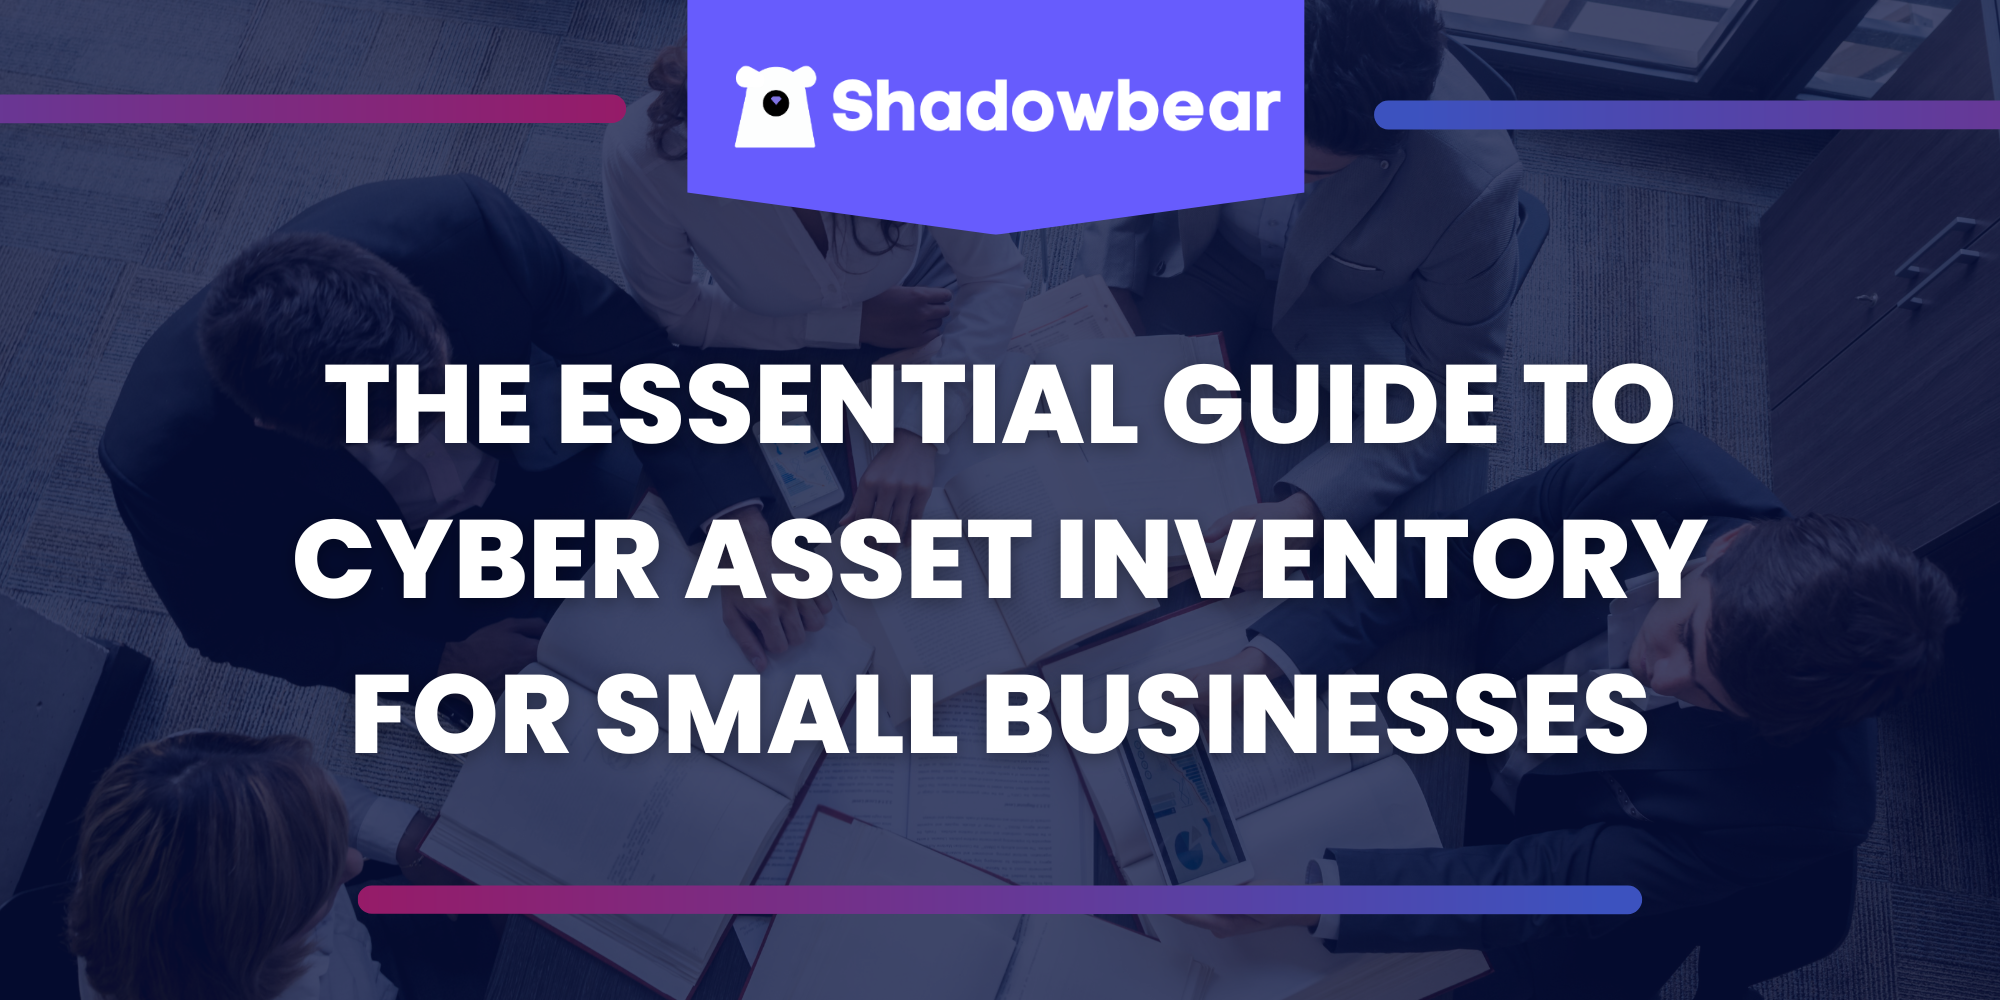 The Essential Guide to Cyber Asset Inventory for Small Businesses